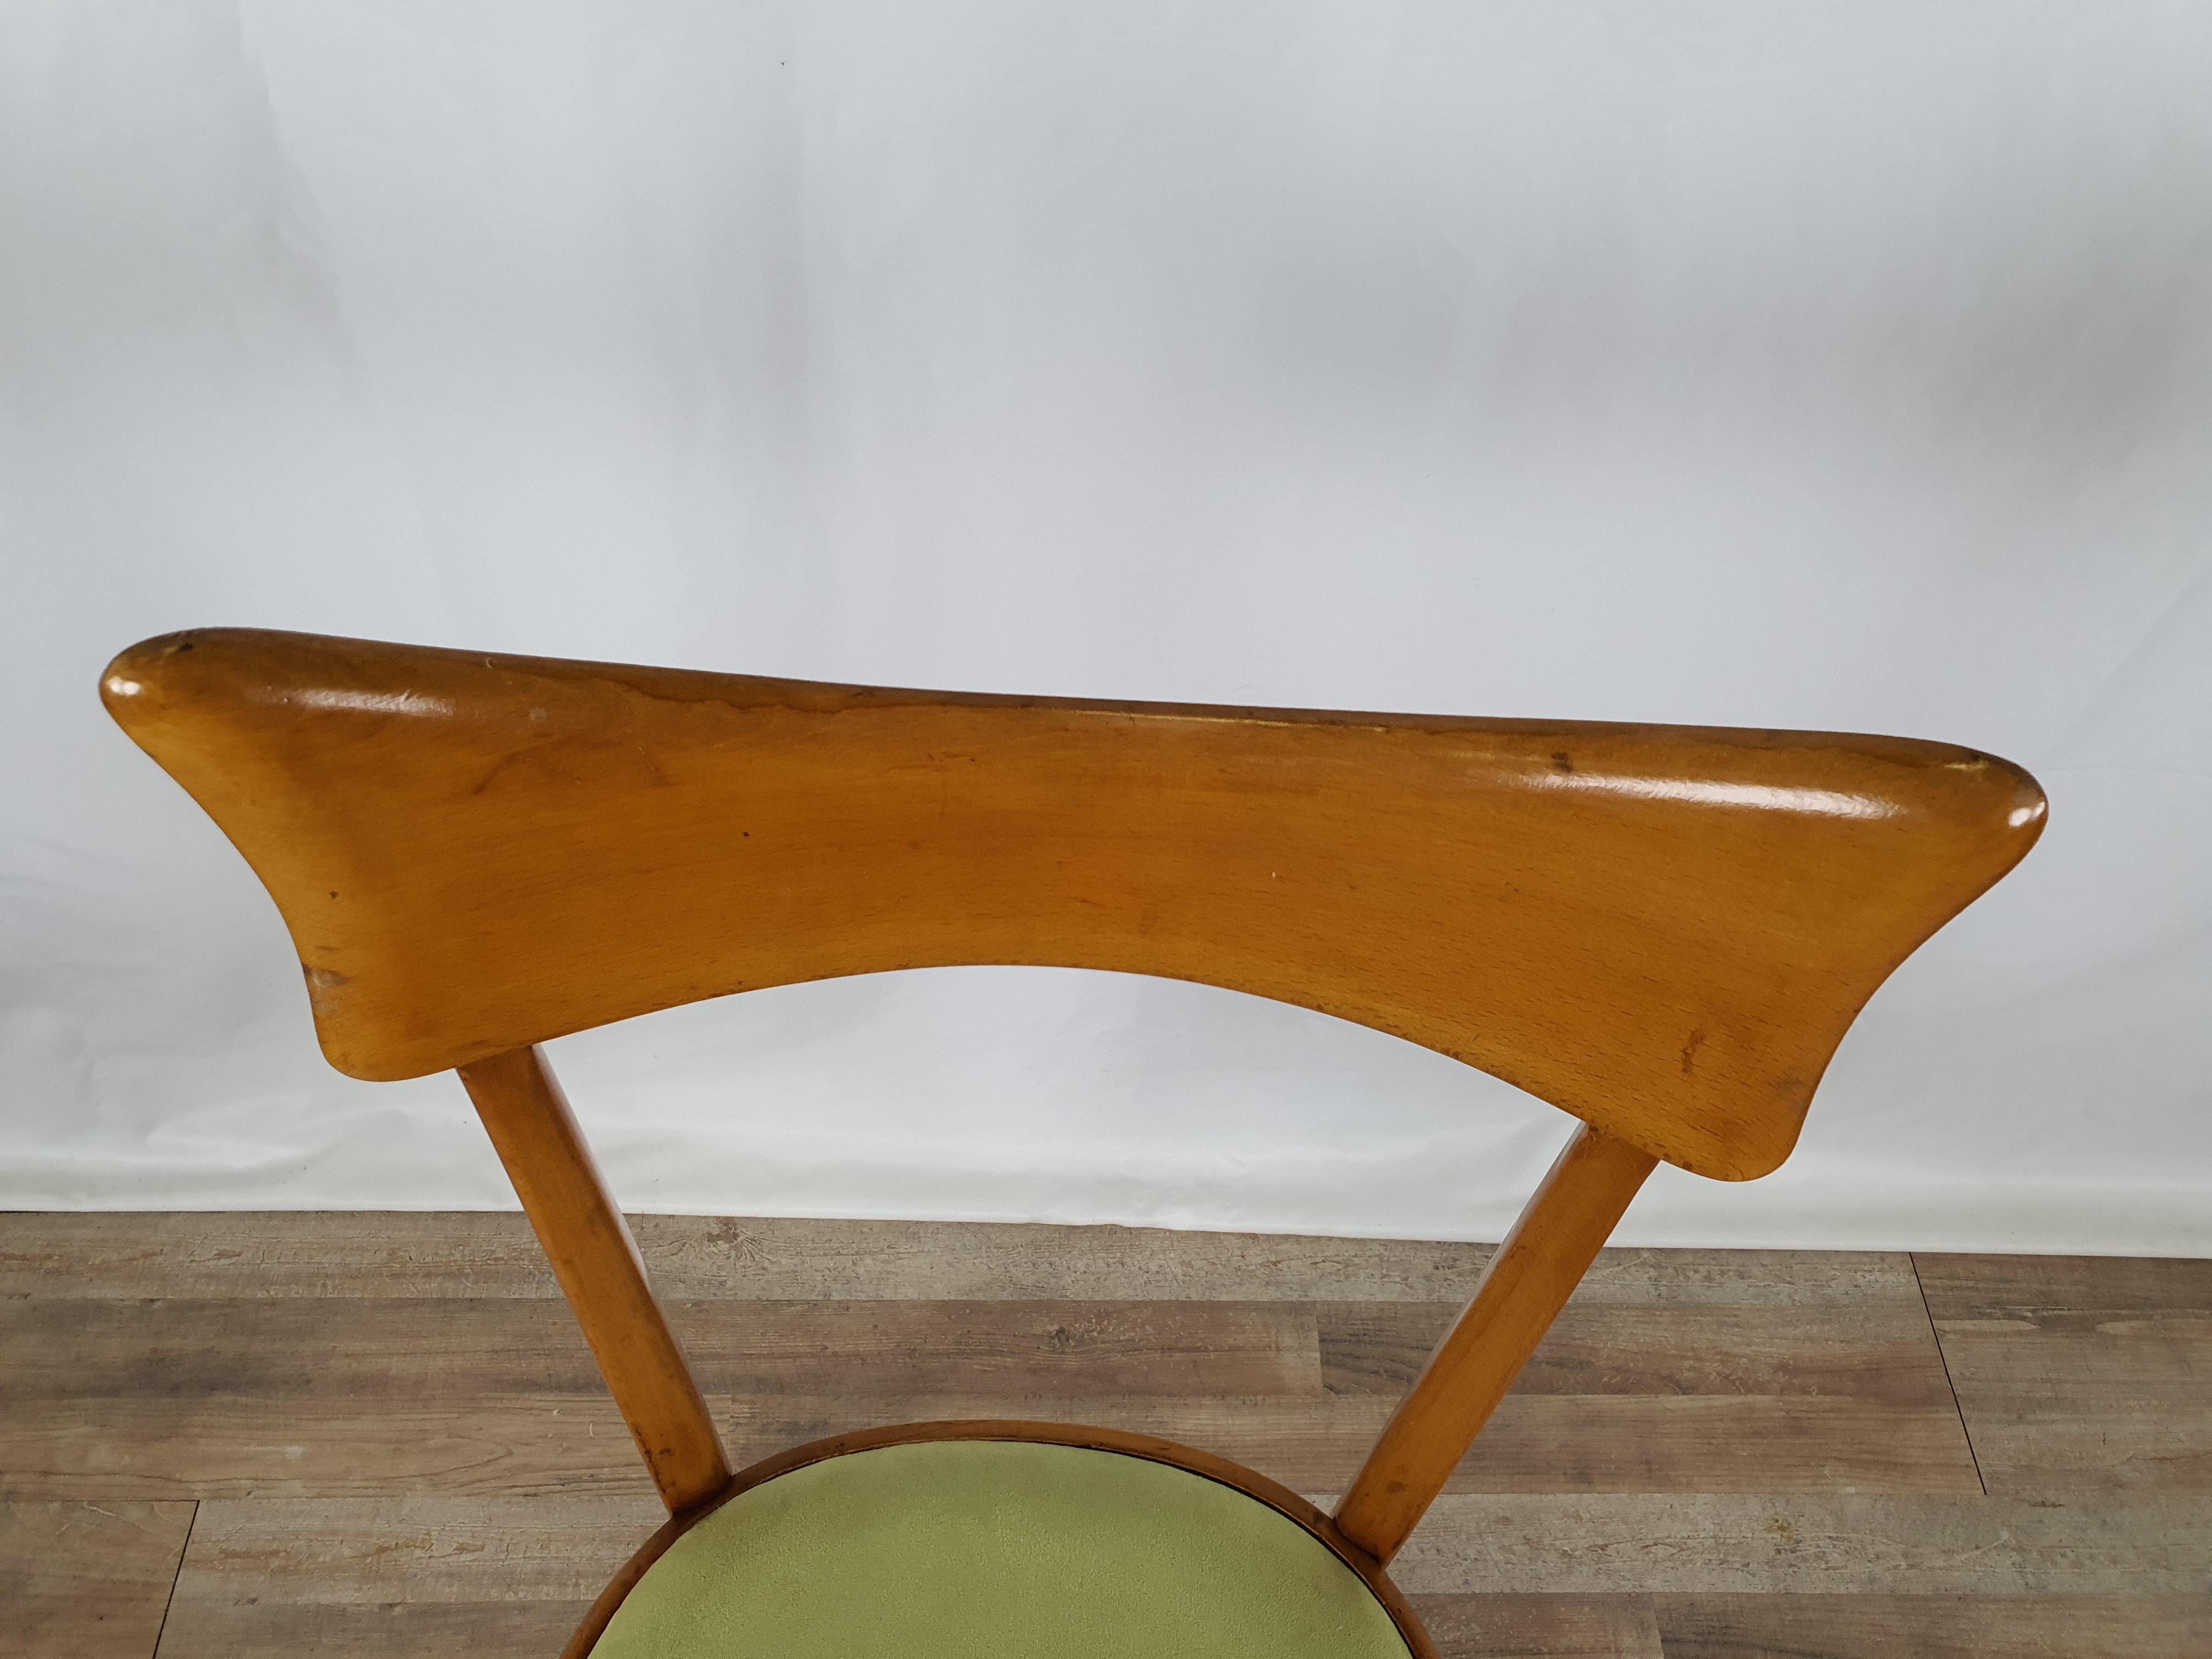 20th Century Padded Beech Chair from the 1950s